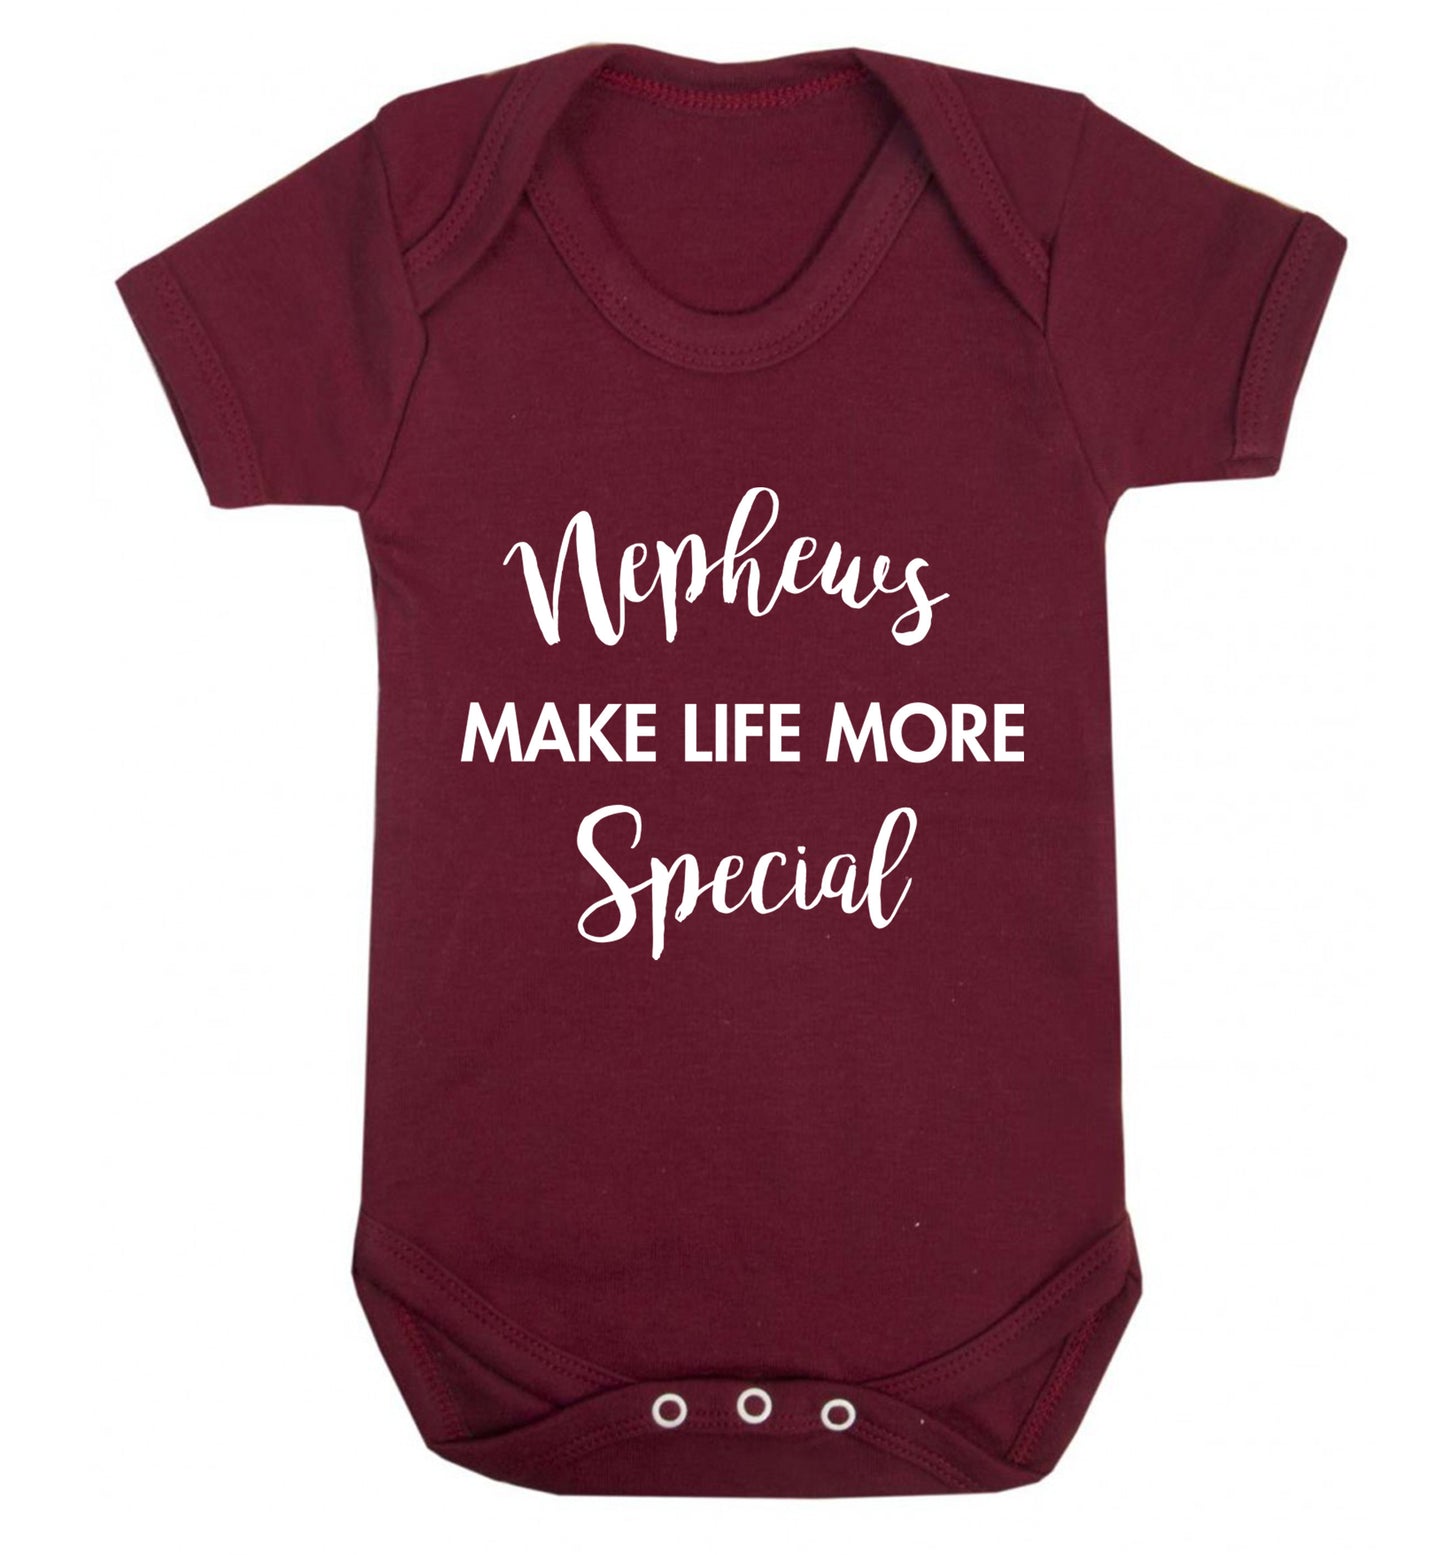 Nephews make life more special Baby Vest maroon 18-24 months